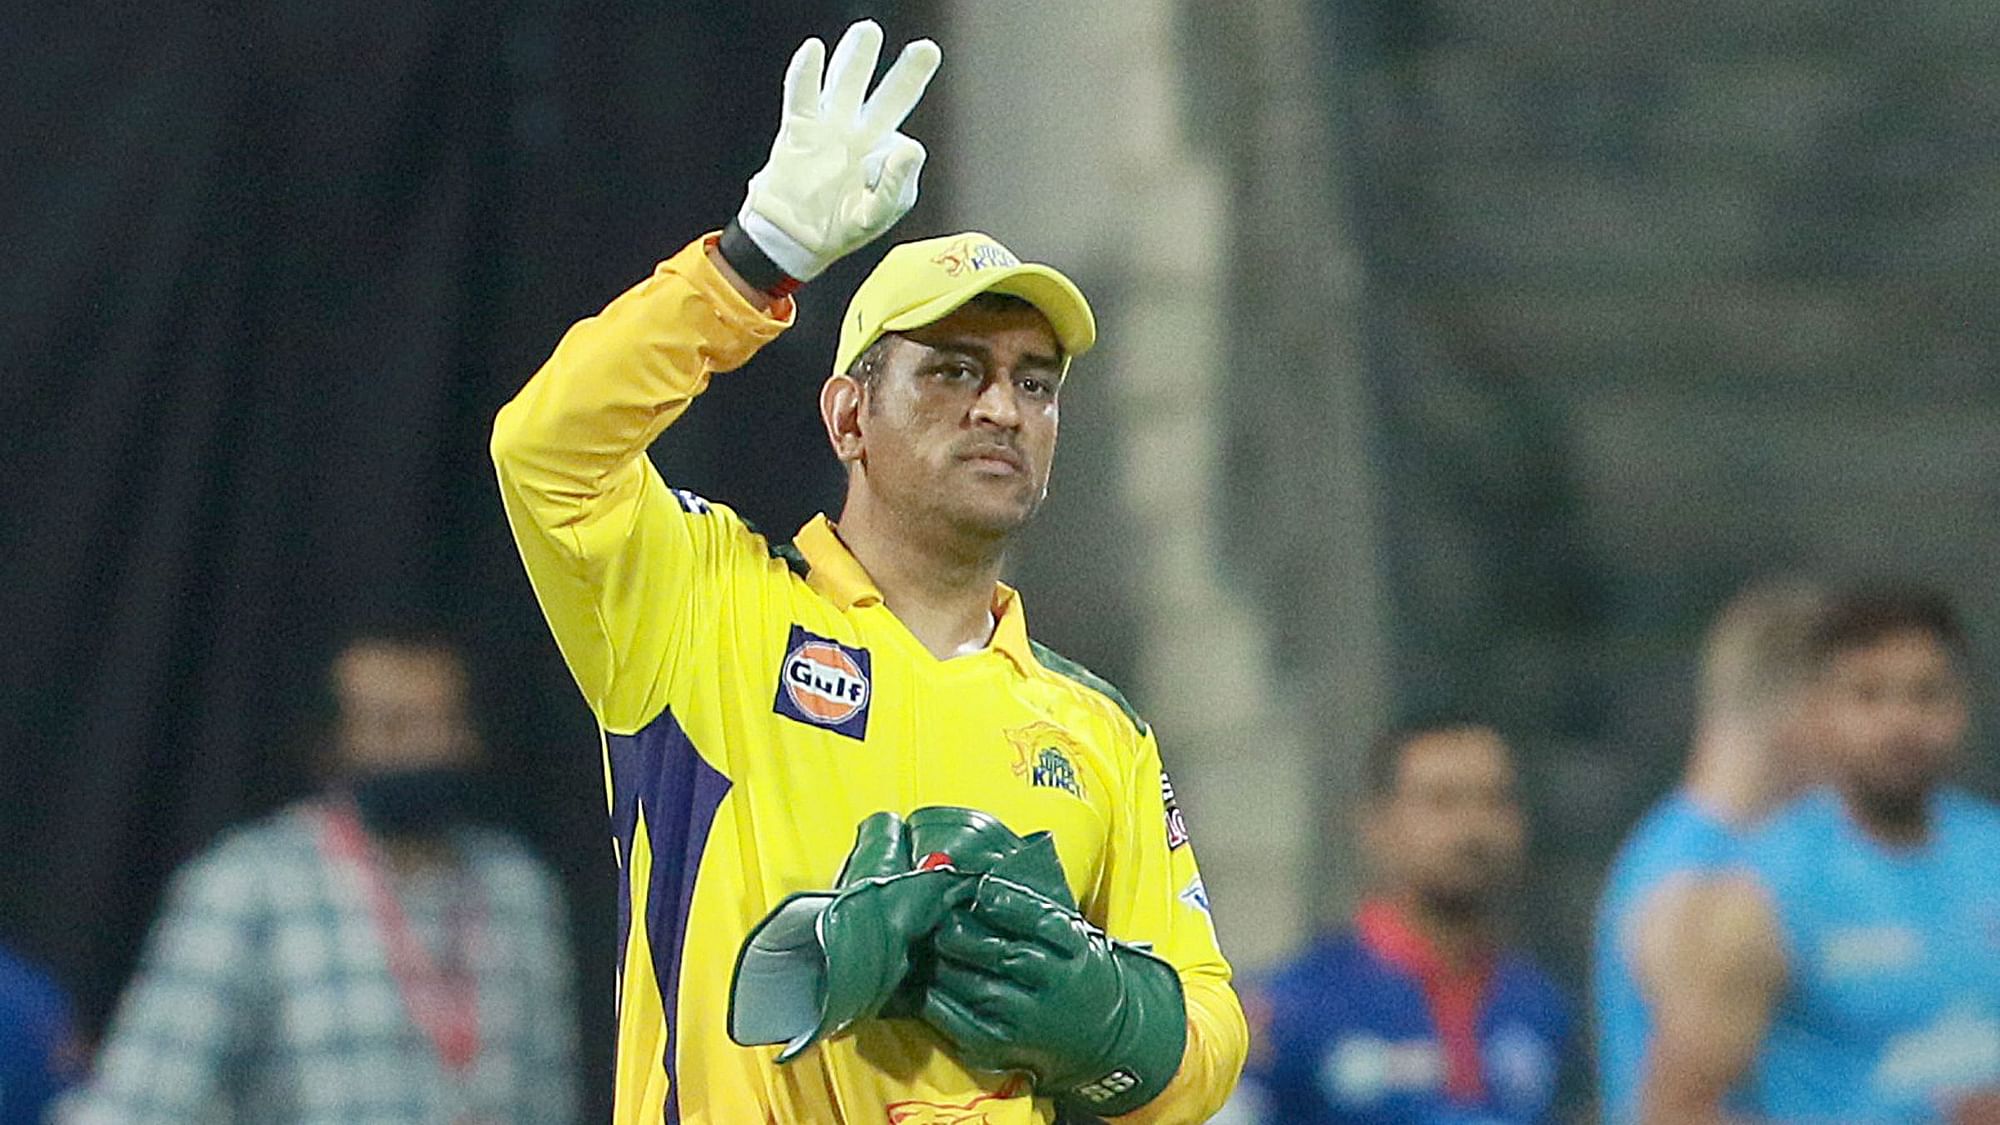 MS Dhoni was fined INR 12 lakh for CSK’s slow over-rate.&nbsp;